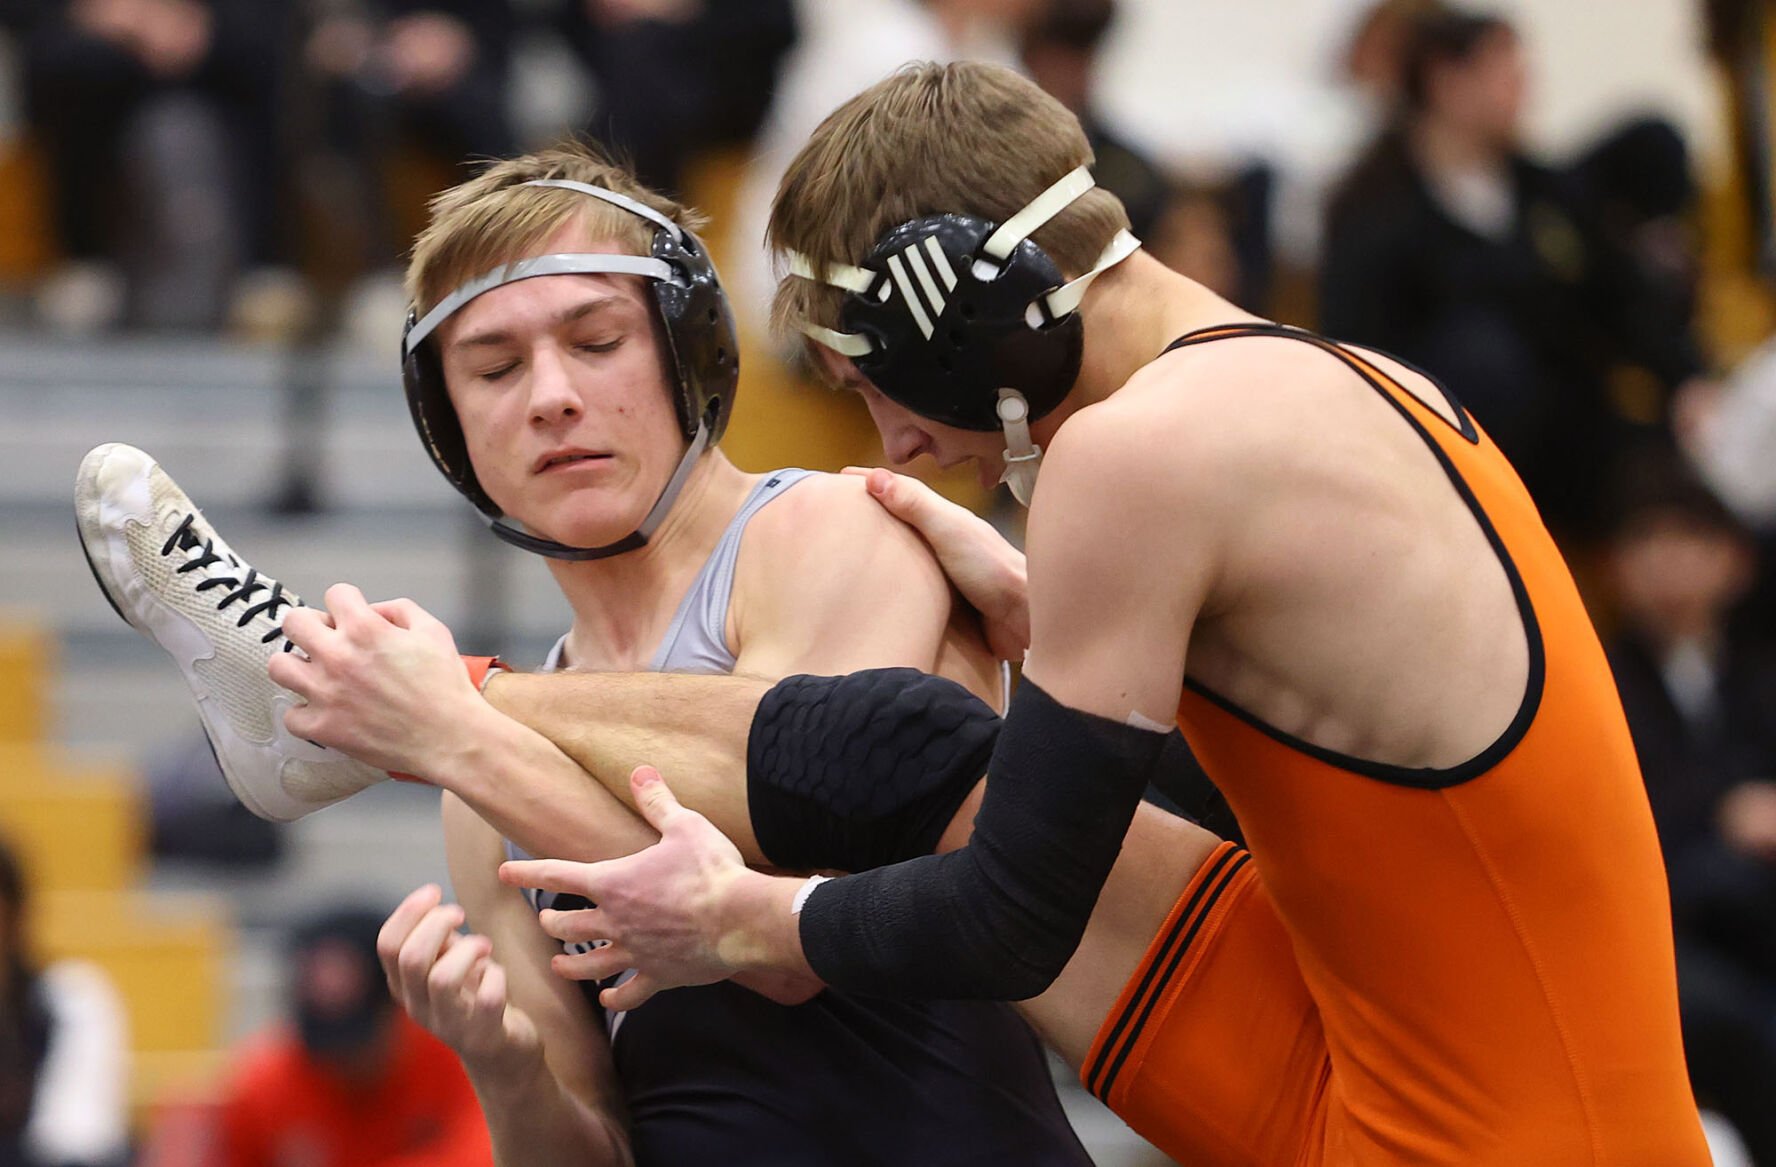 Tye Linser’s Journey to the Indiana High School Wrestling State Finals: Determination and Dreams